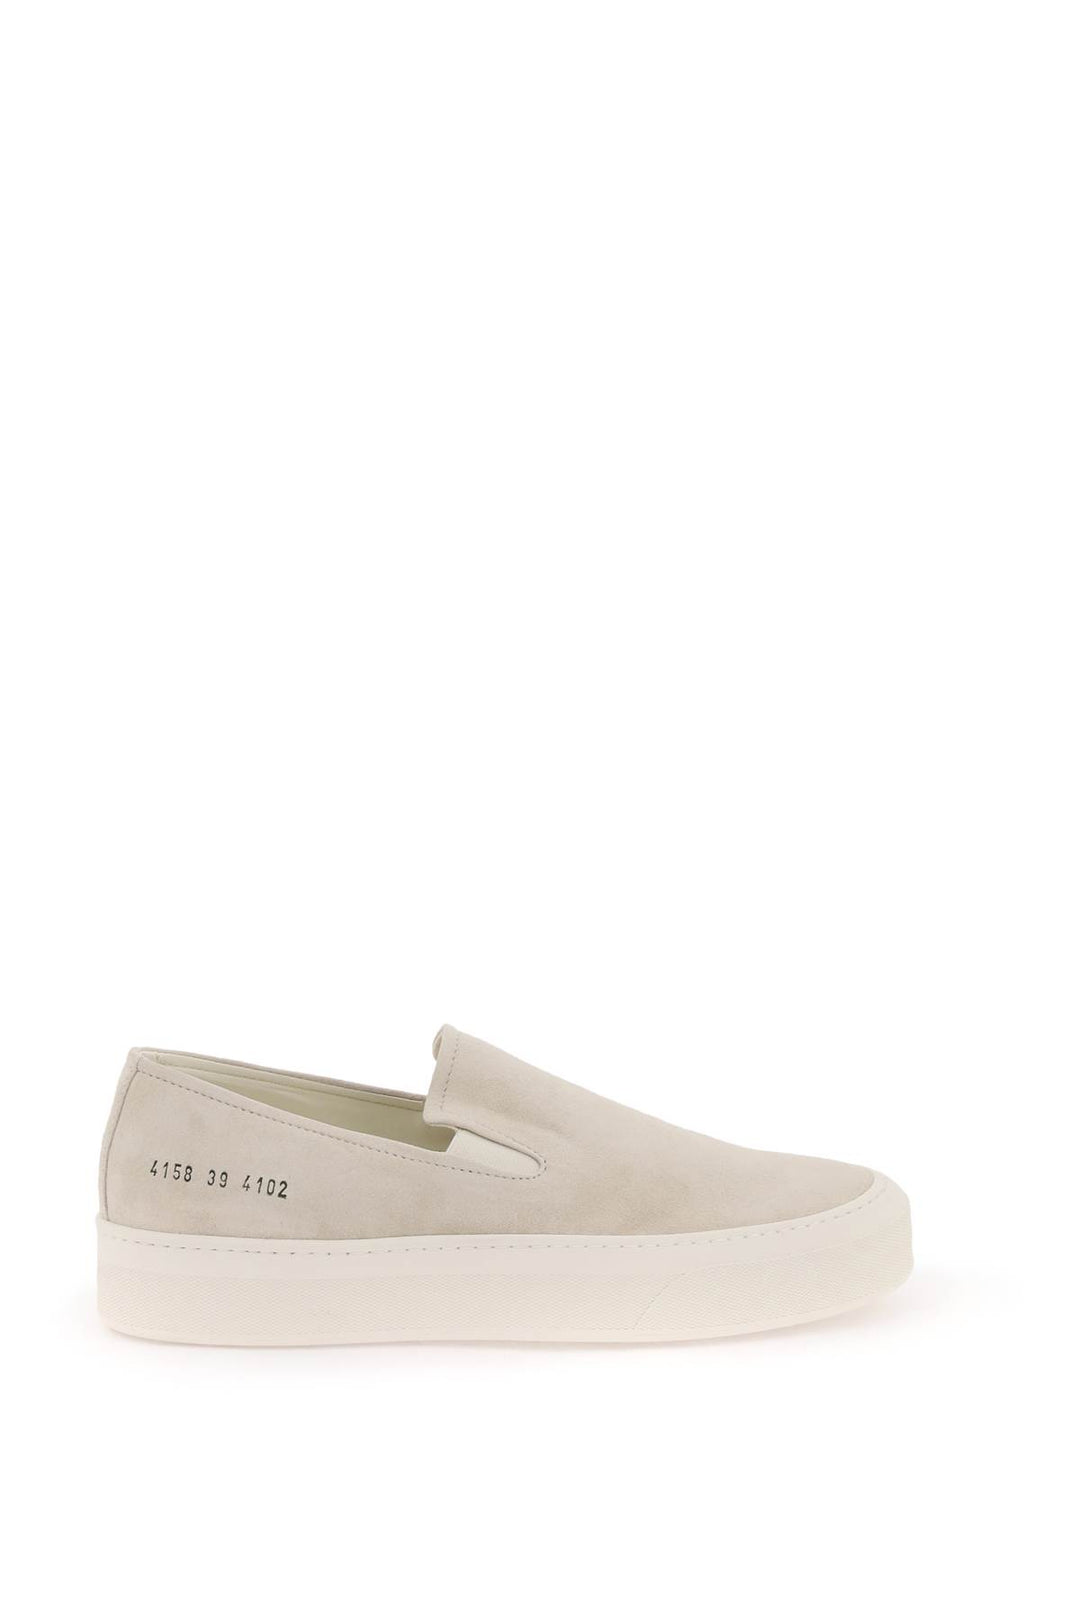 Common Projects Slip On Sneakers   Beige